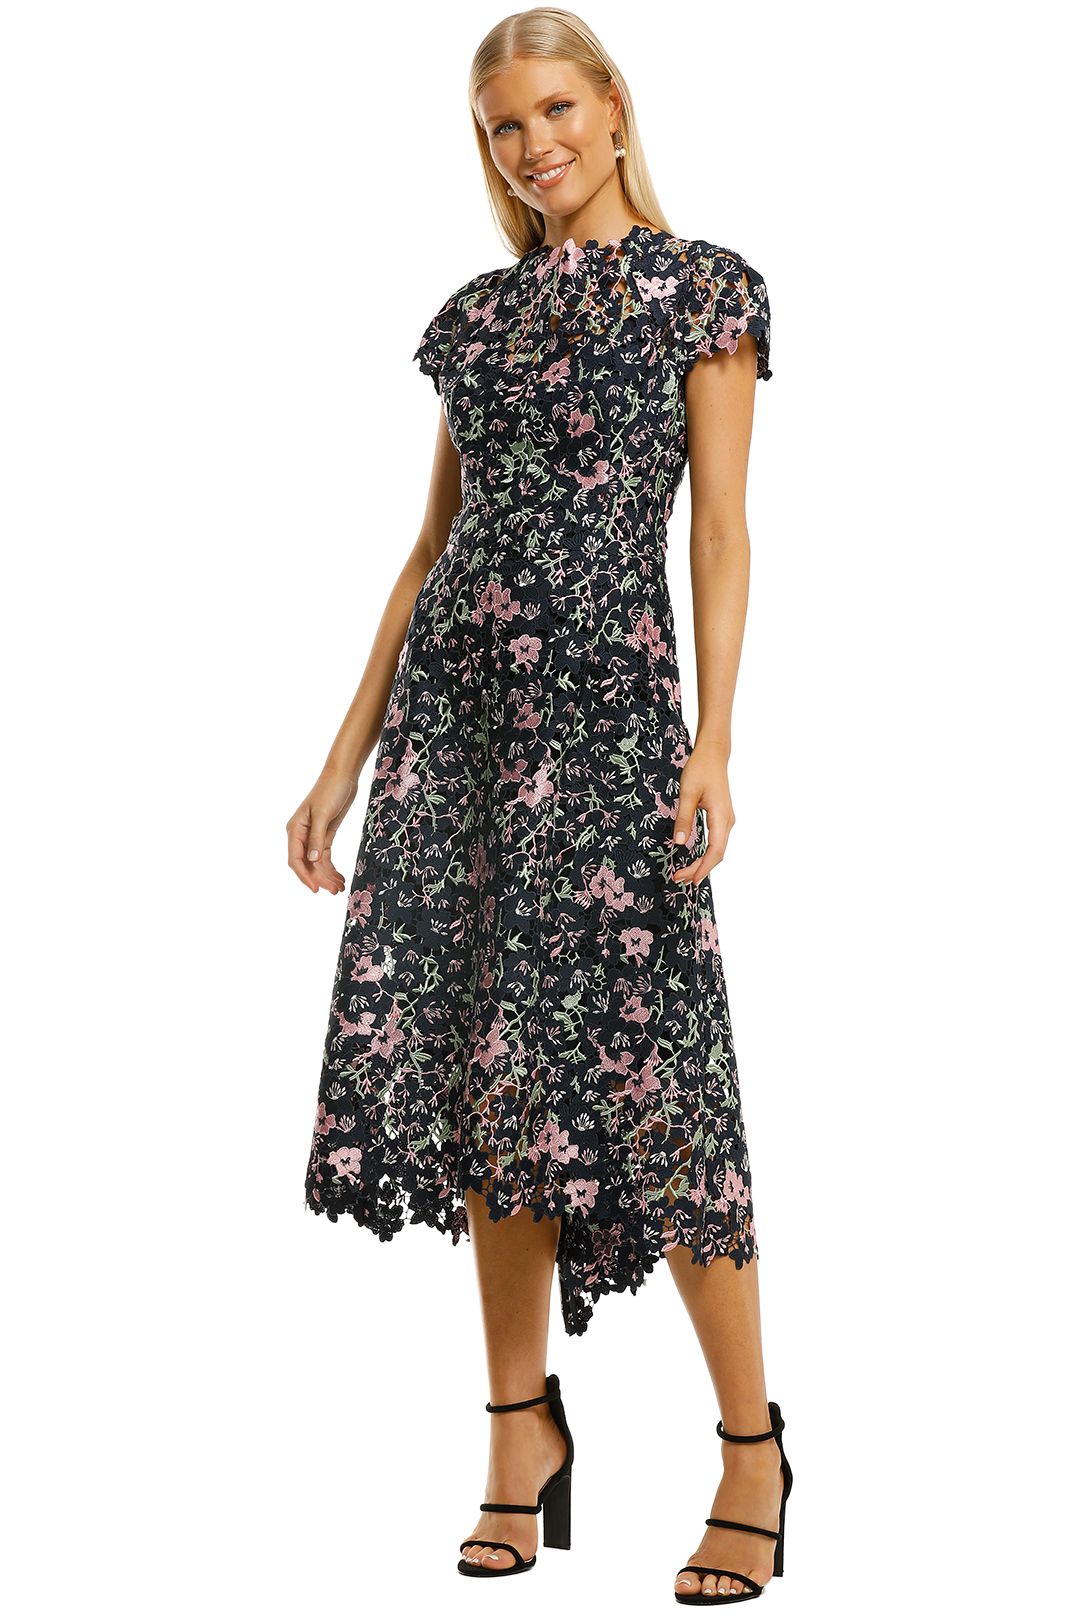 Birdy Dress in Floral by Moss and Spy for Rent | GlamCorner